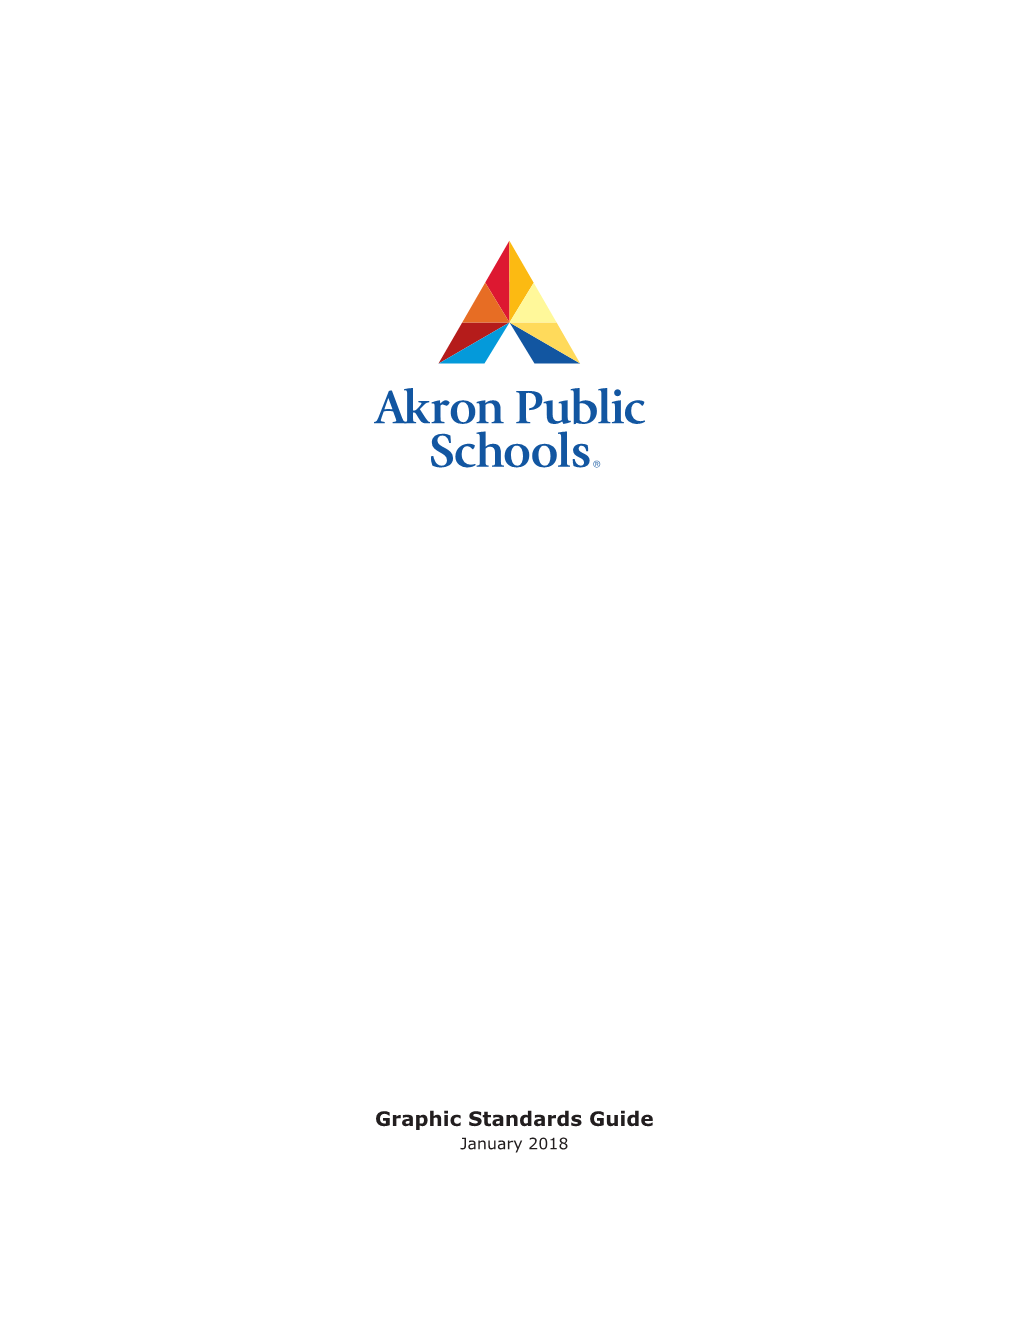 Graphic Standards Guide January 2018 the Akron Public Schools Brand Our Brand Is Our Reputation